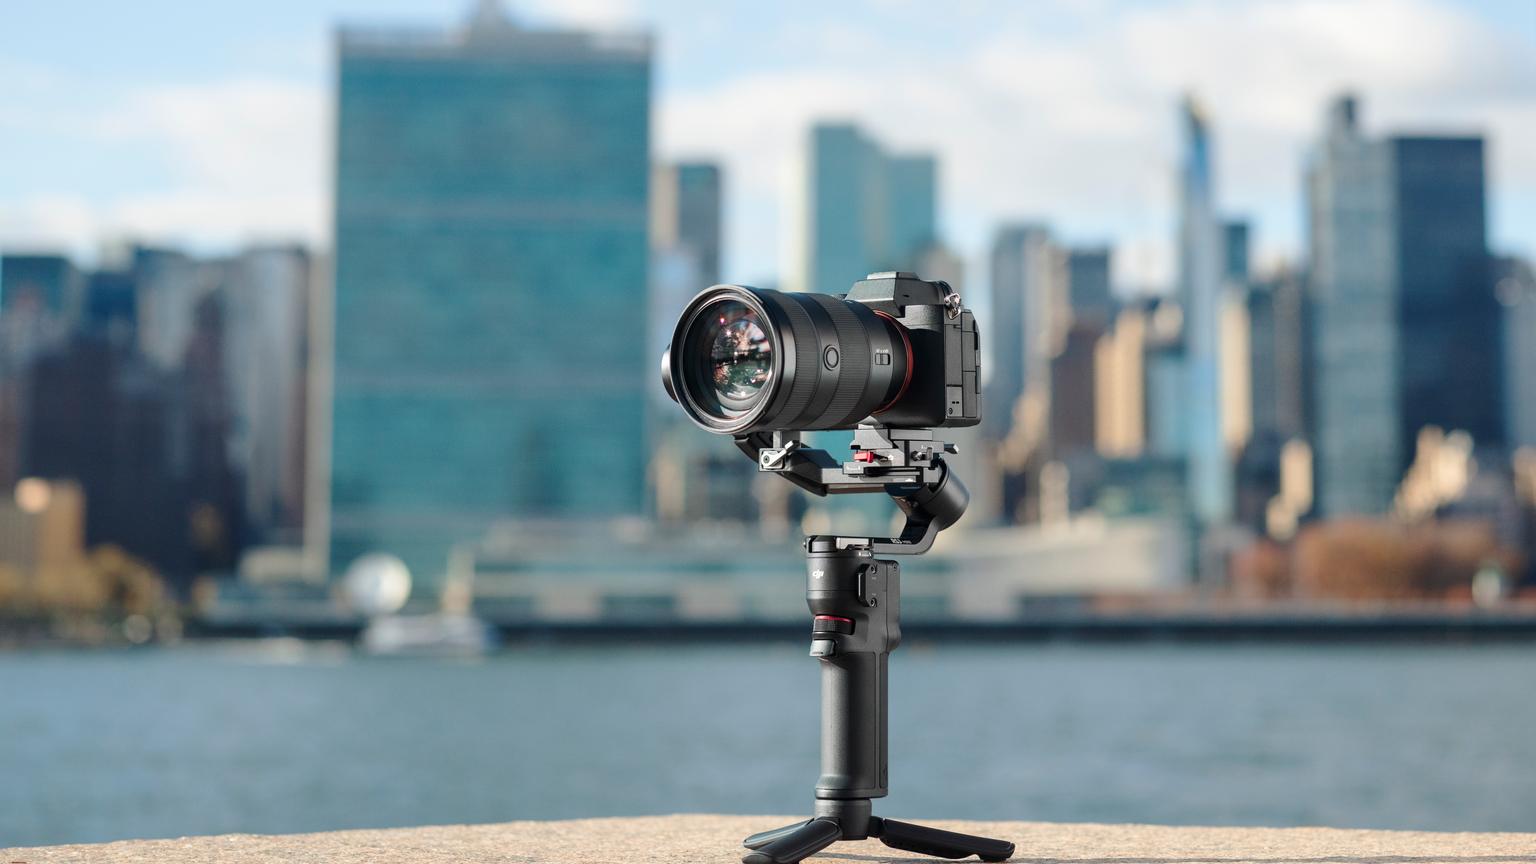 The RS 3 Mini First Look | DJI's Smallest Camera Gimbal Ever?